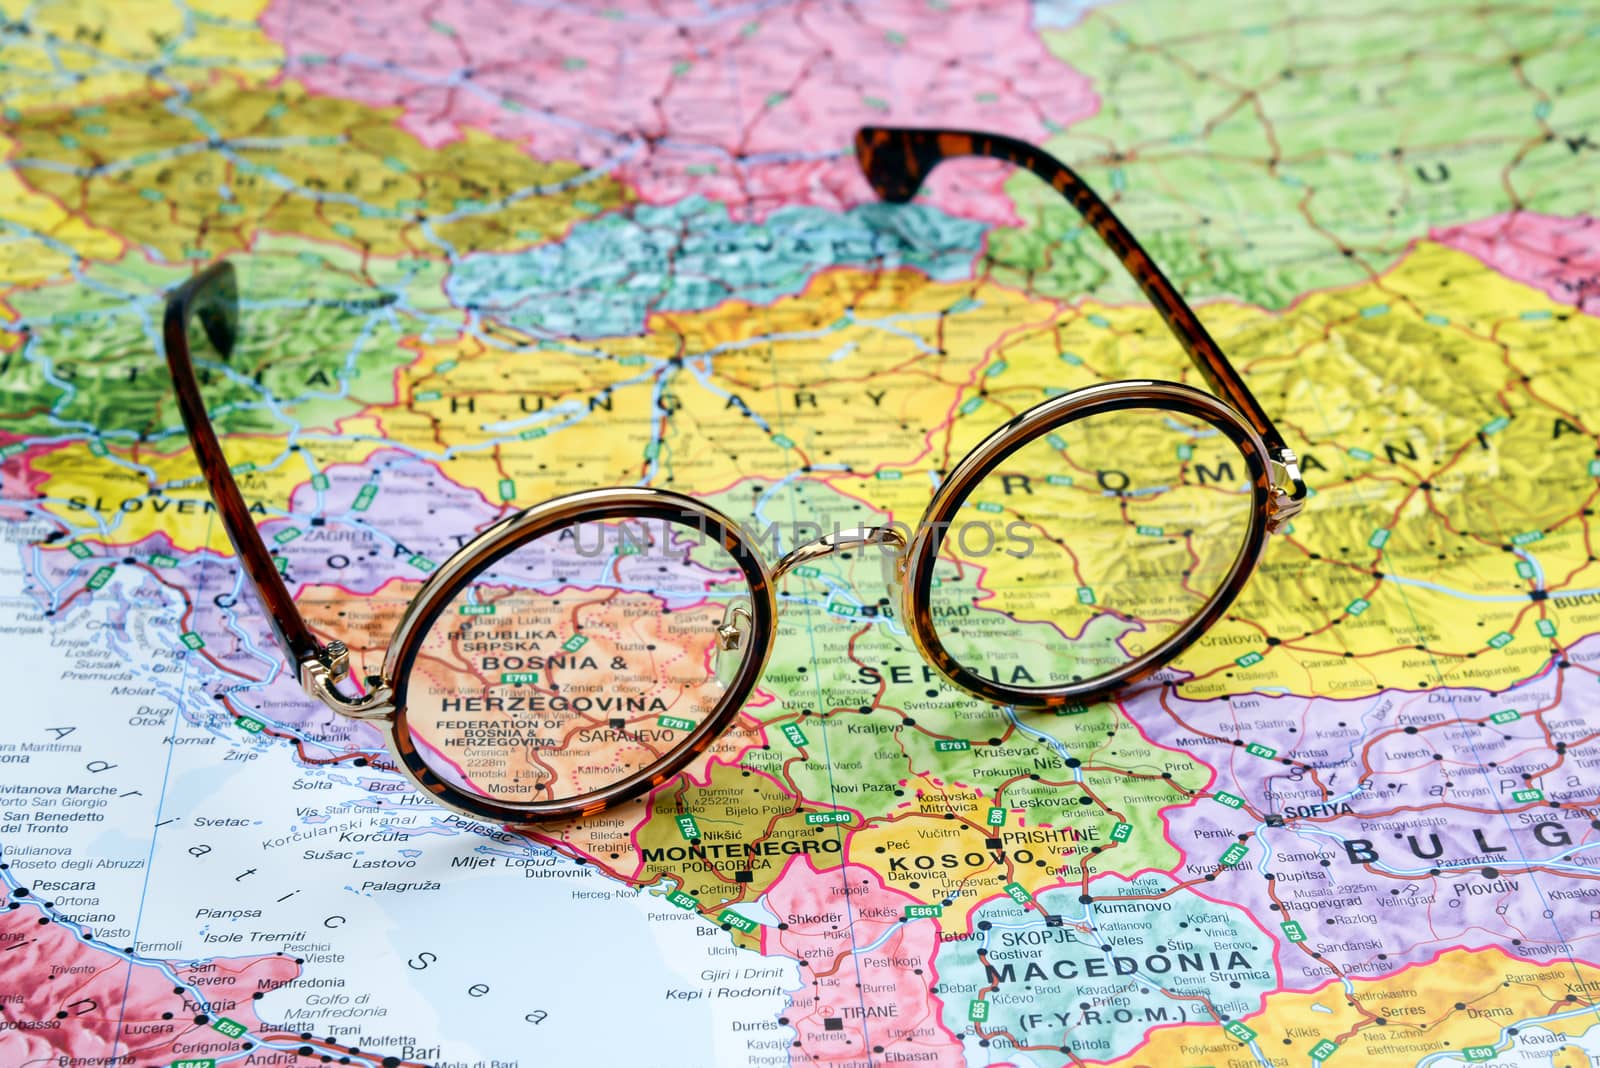 Glasses on a map of europe - Bosnia and Herzegovina by dk_photos